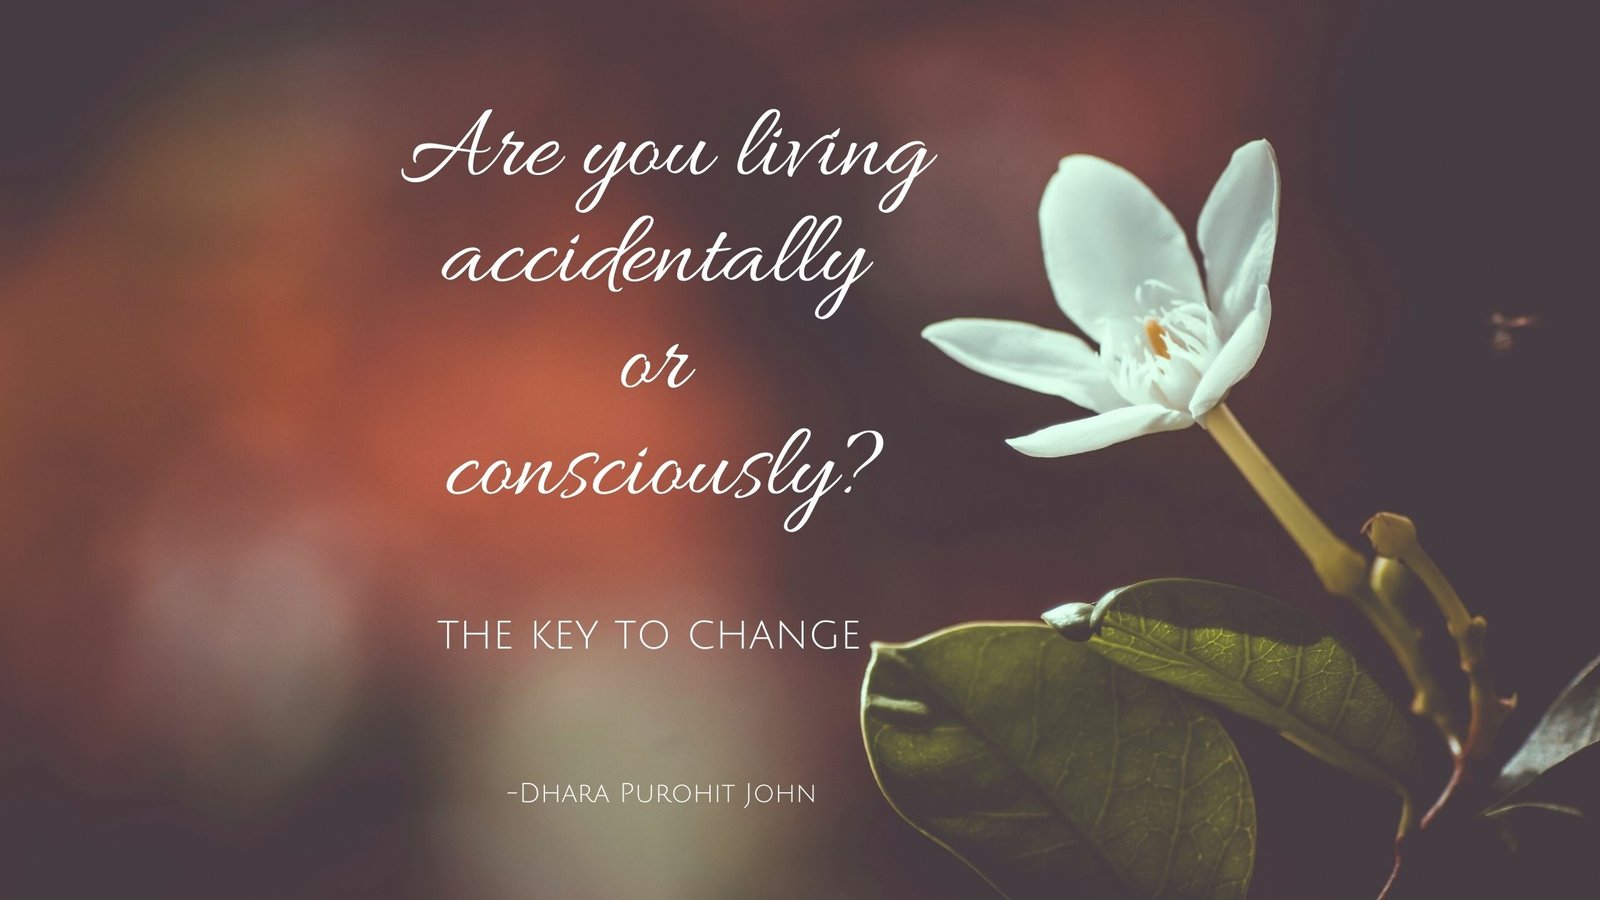 The key to change: Are you living accidentally or consciously?